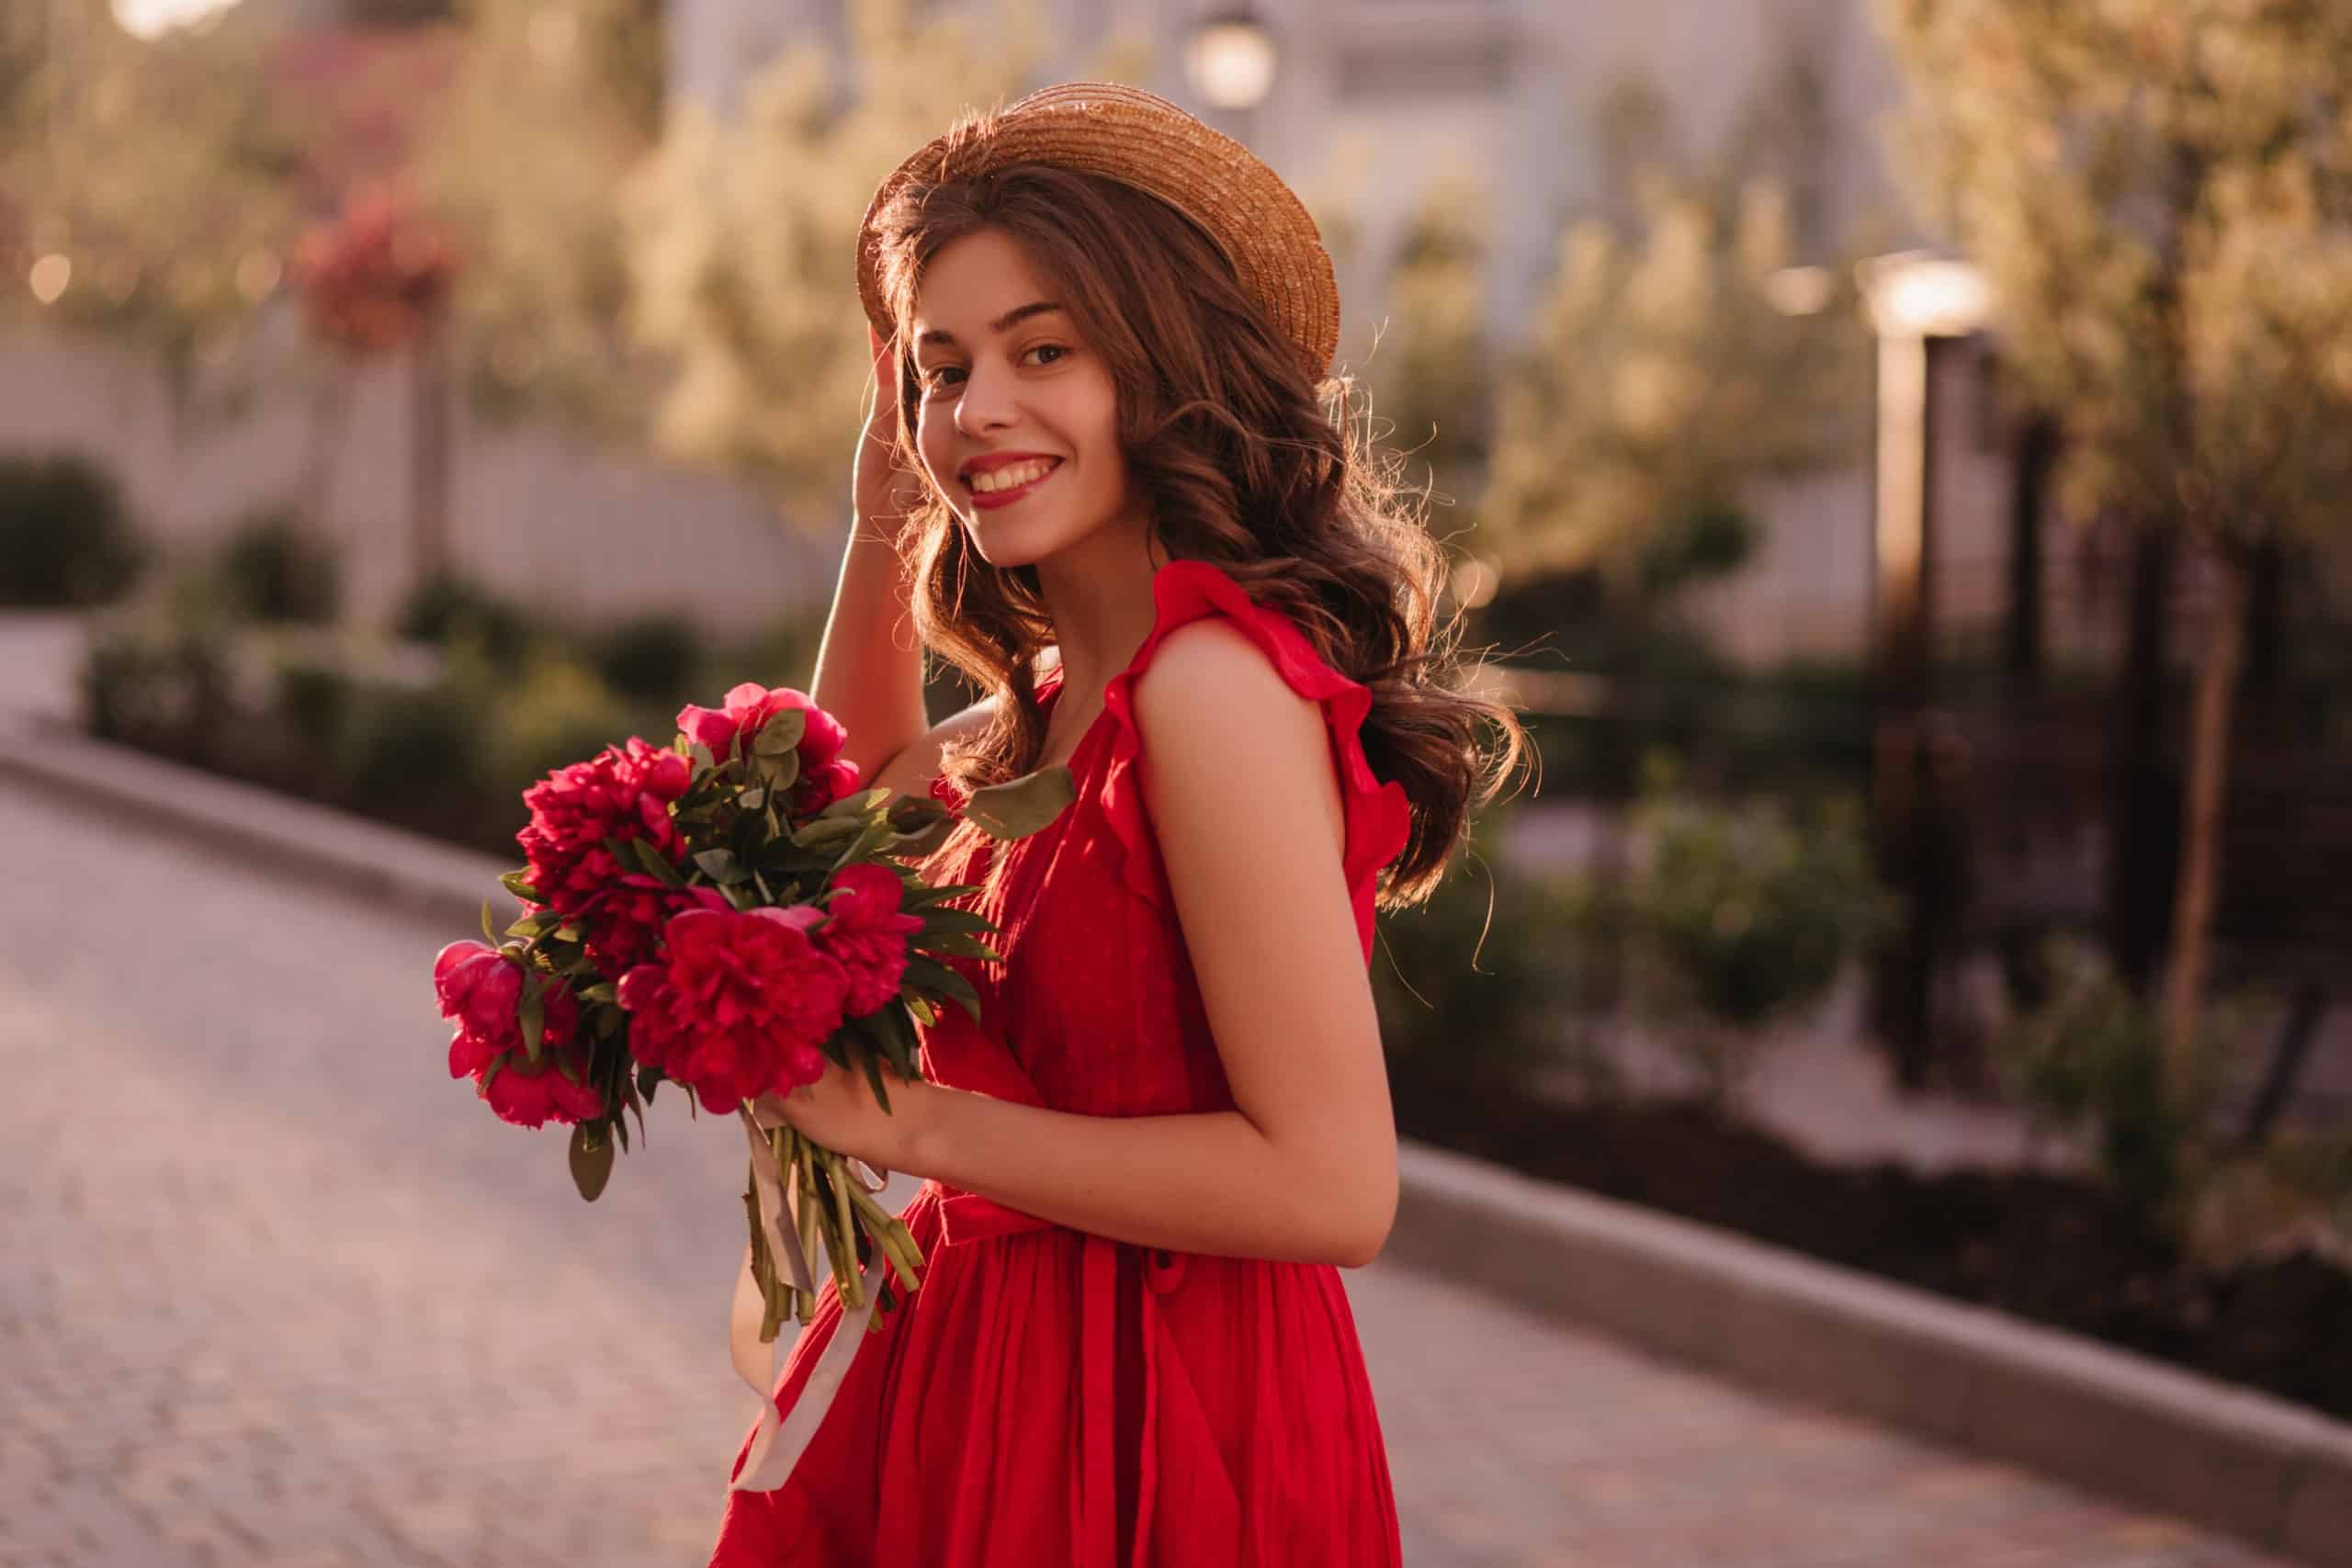 A lovely girl in red is walking on the street with a boquet of red roses in a romantic mood before the sunset